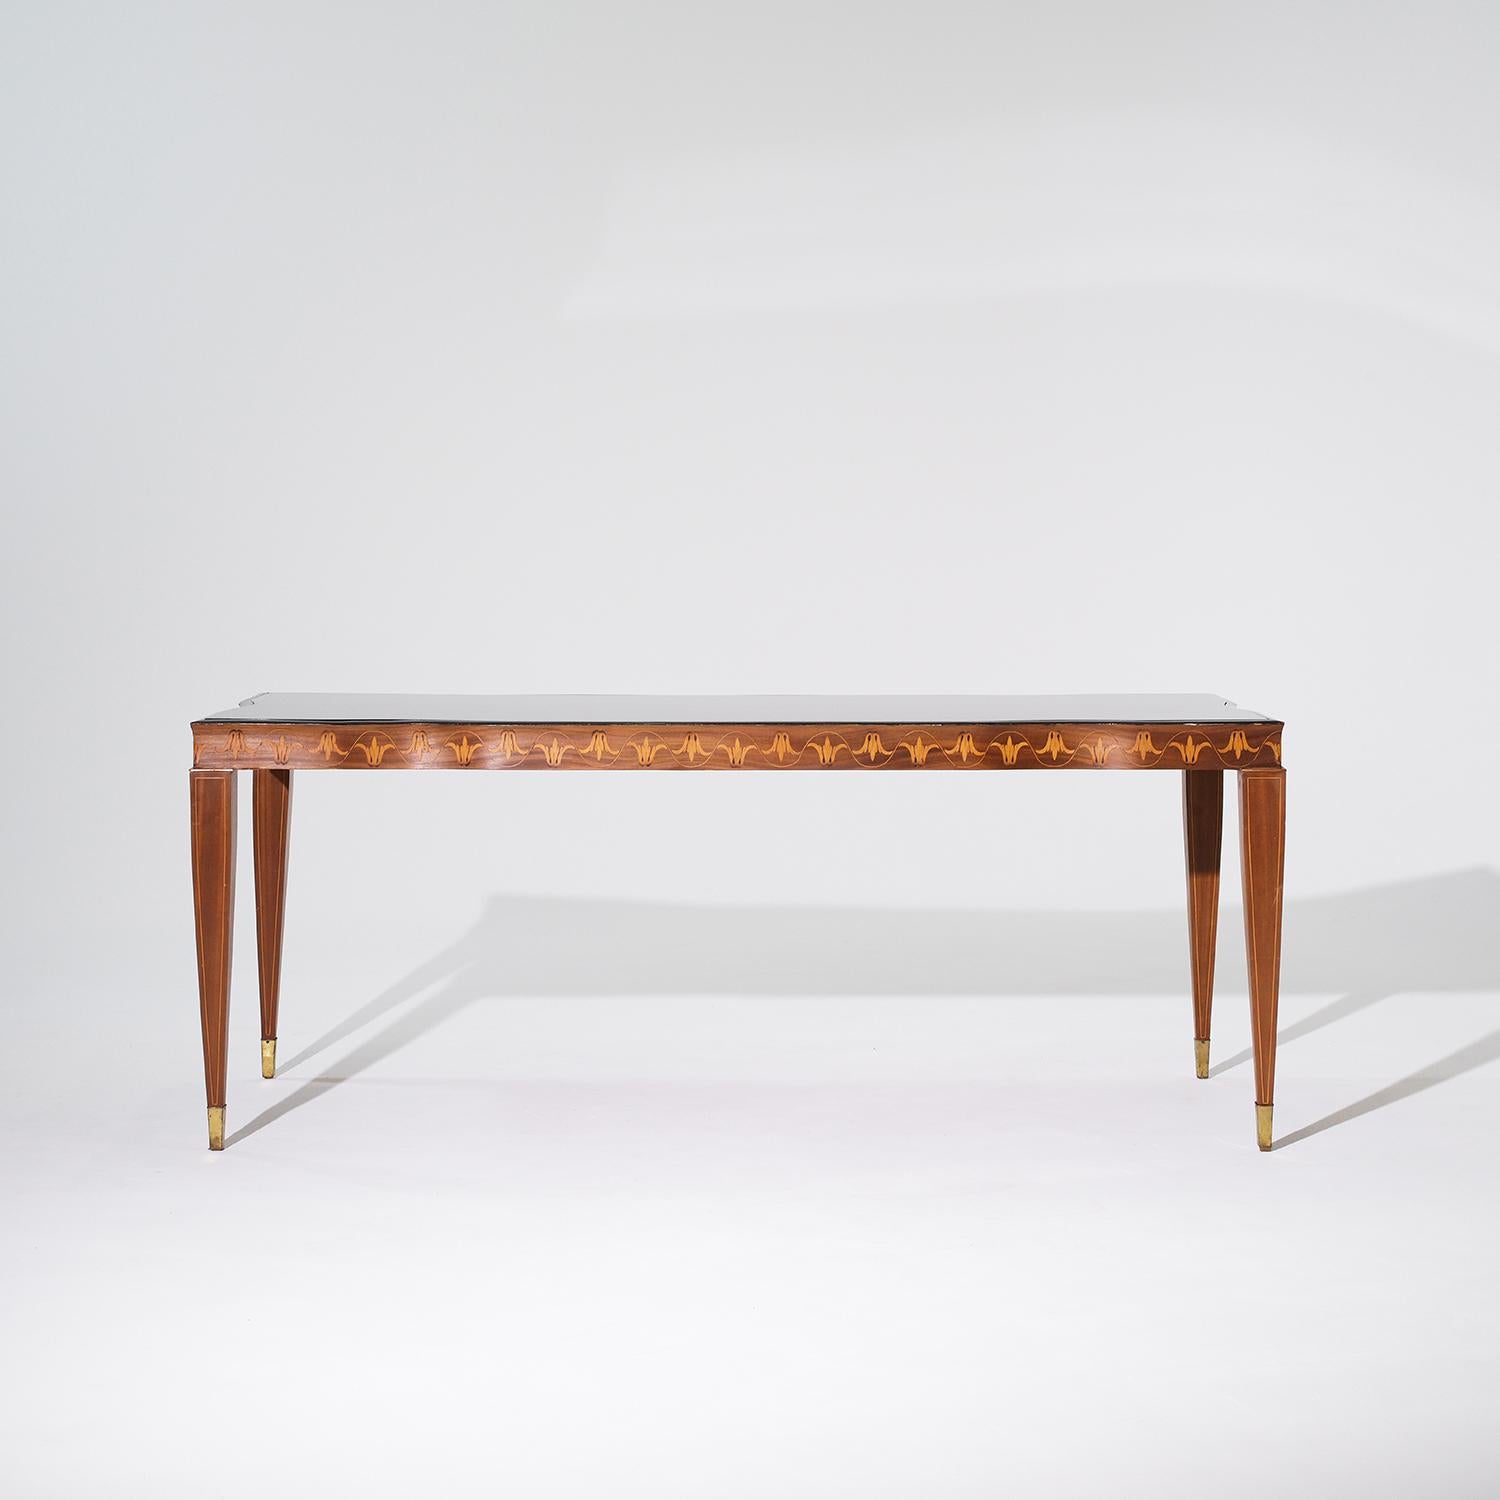 A vintage Mid-Century modern Italian dining room table made of hand crafted polished Rosewood, designed by Paolo Buffa and Serafino Arrighi in good condition. The rectangular conference table is composed with its original smoked black glass top,